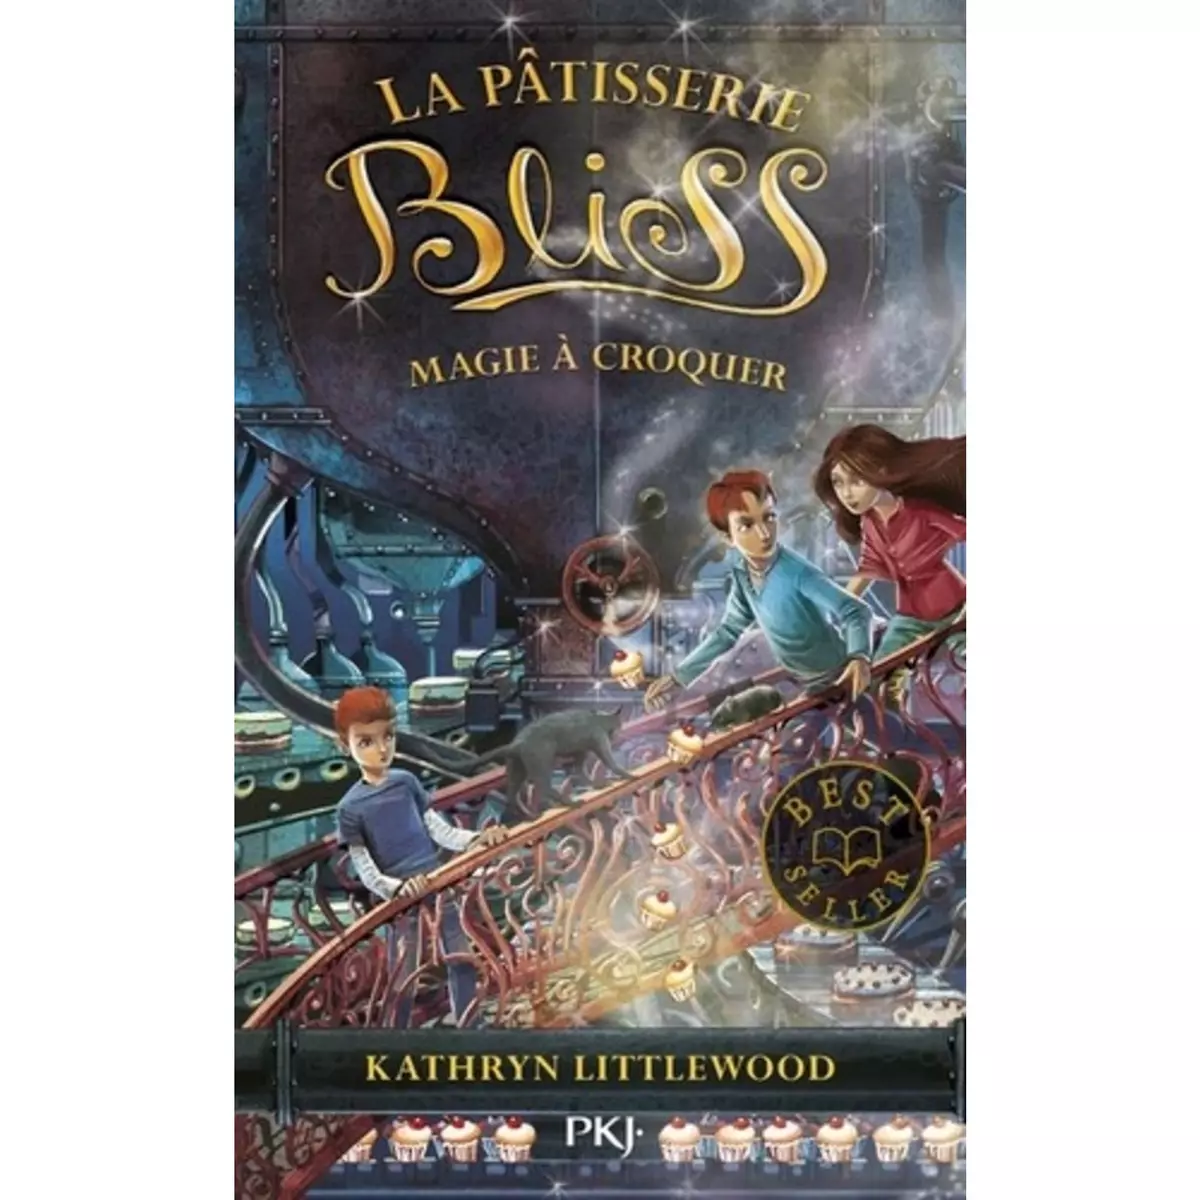  LA PATISSERIE BLISS TOME 3 : MAGIE A CROQUER, Littlewood Kathryn